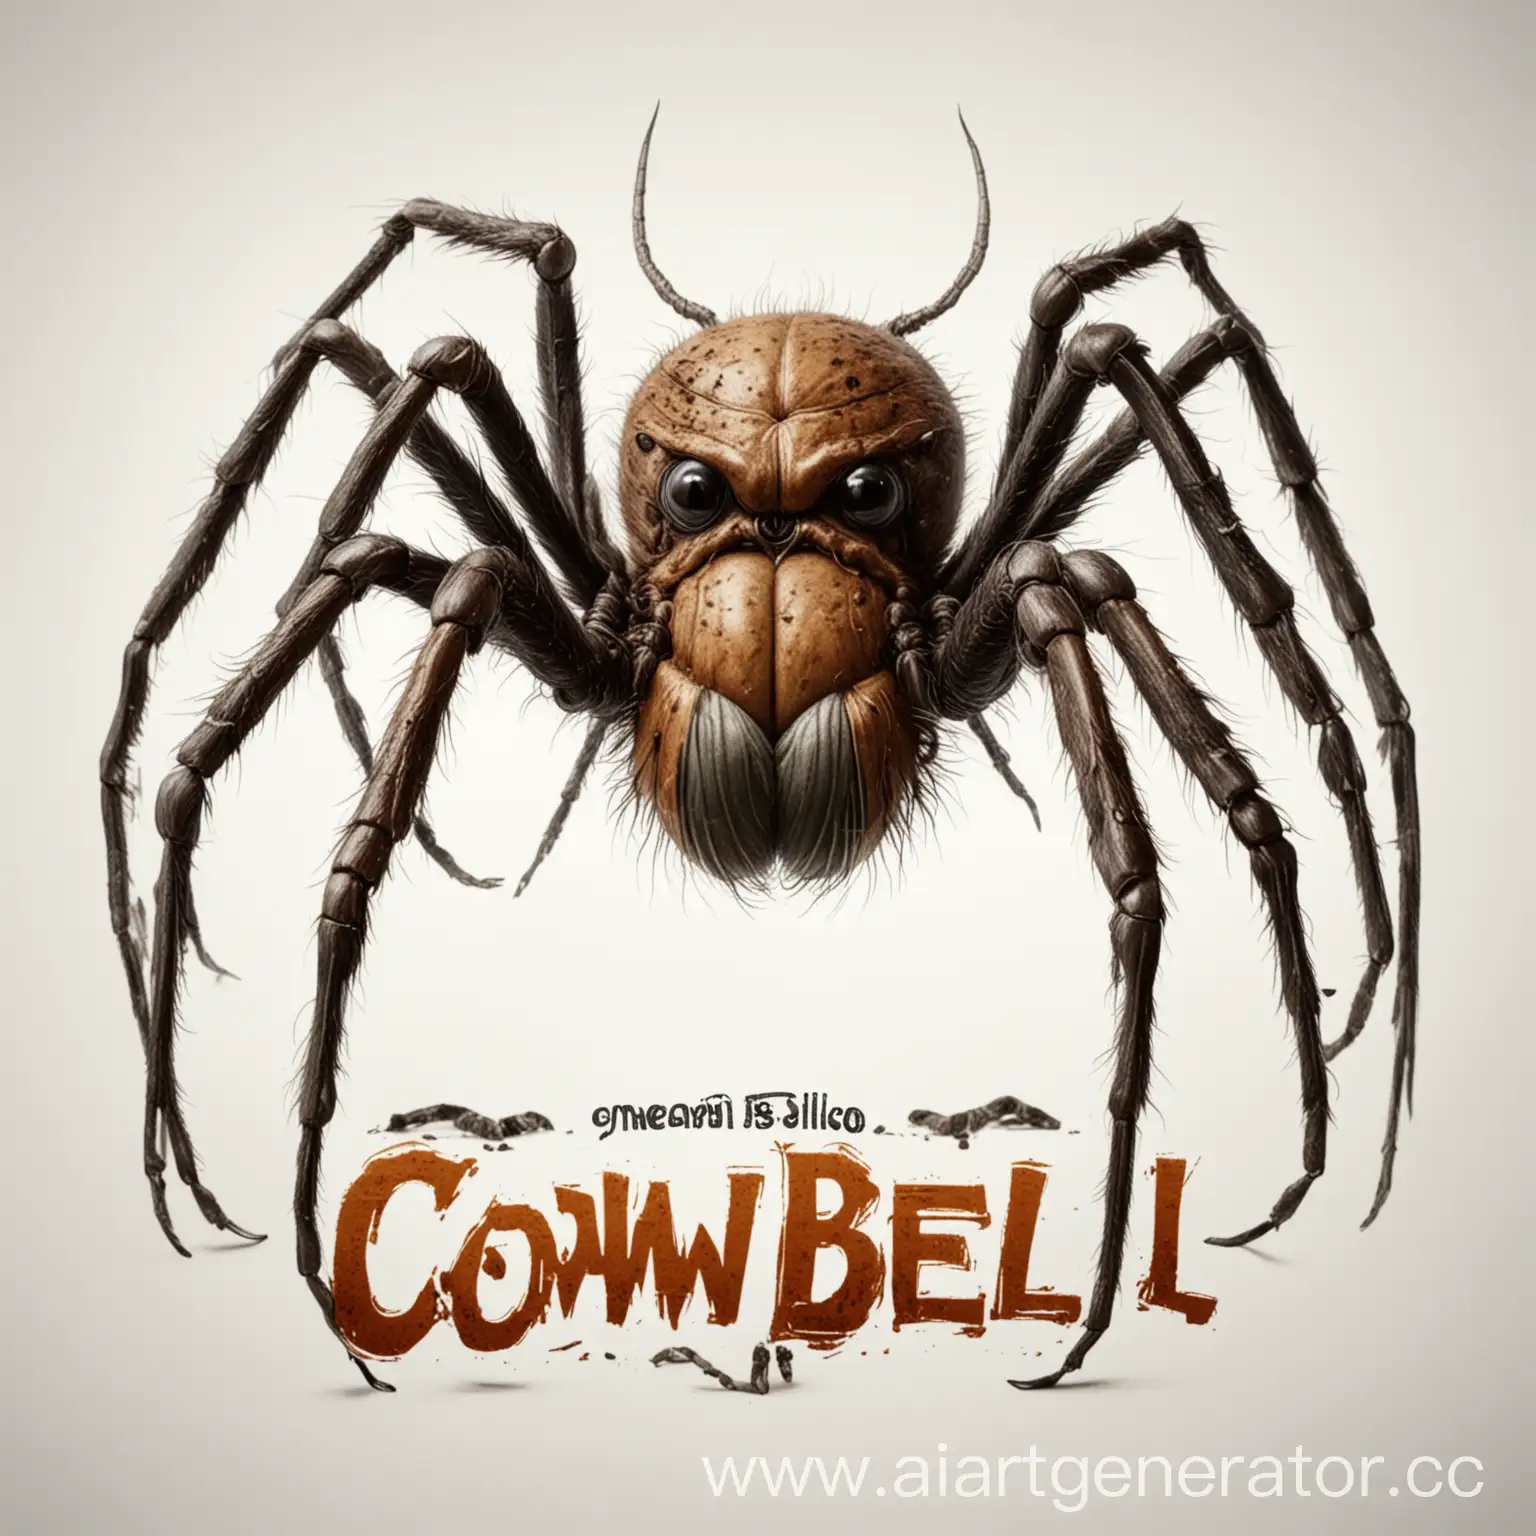 Brazilian-Funk-Style-Huge-Spider-on-White-Background-with-Cowbell-Inscription